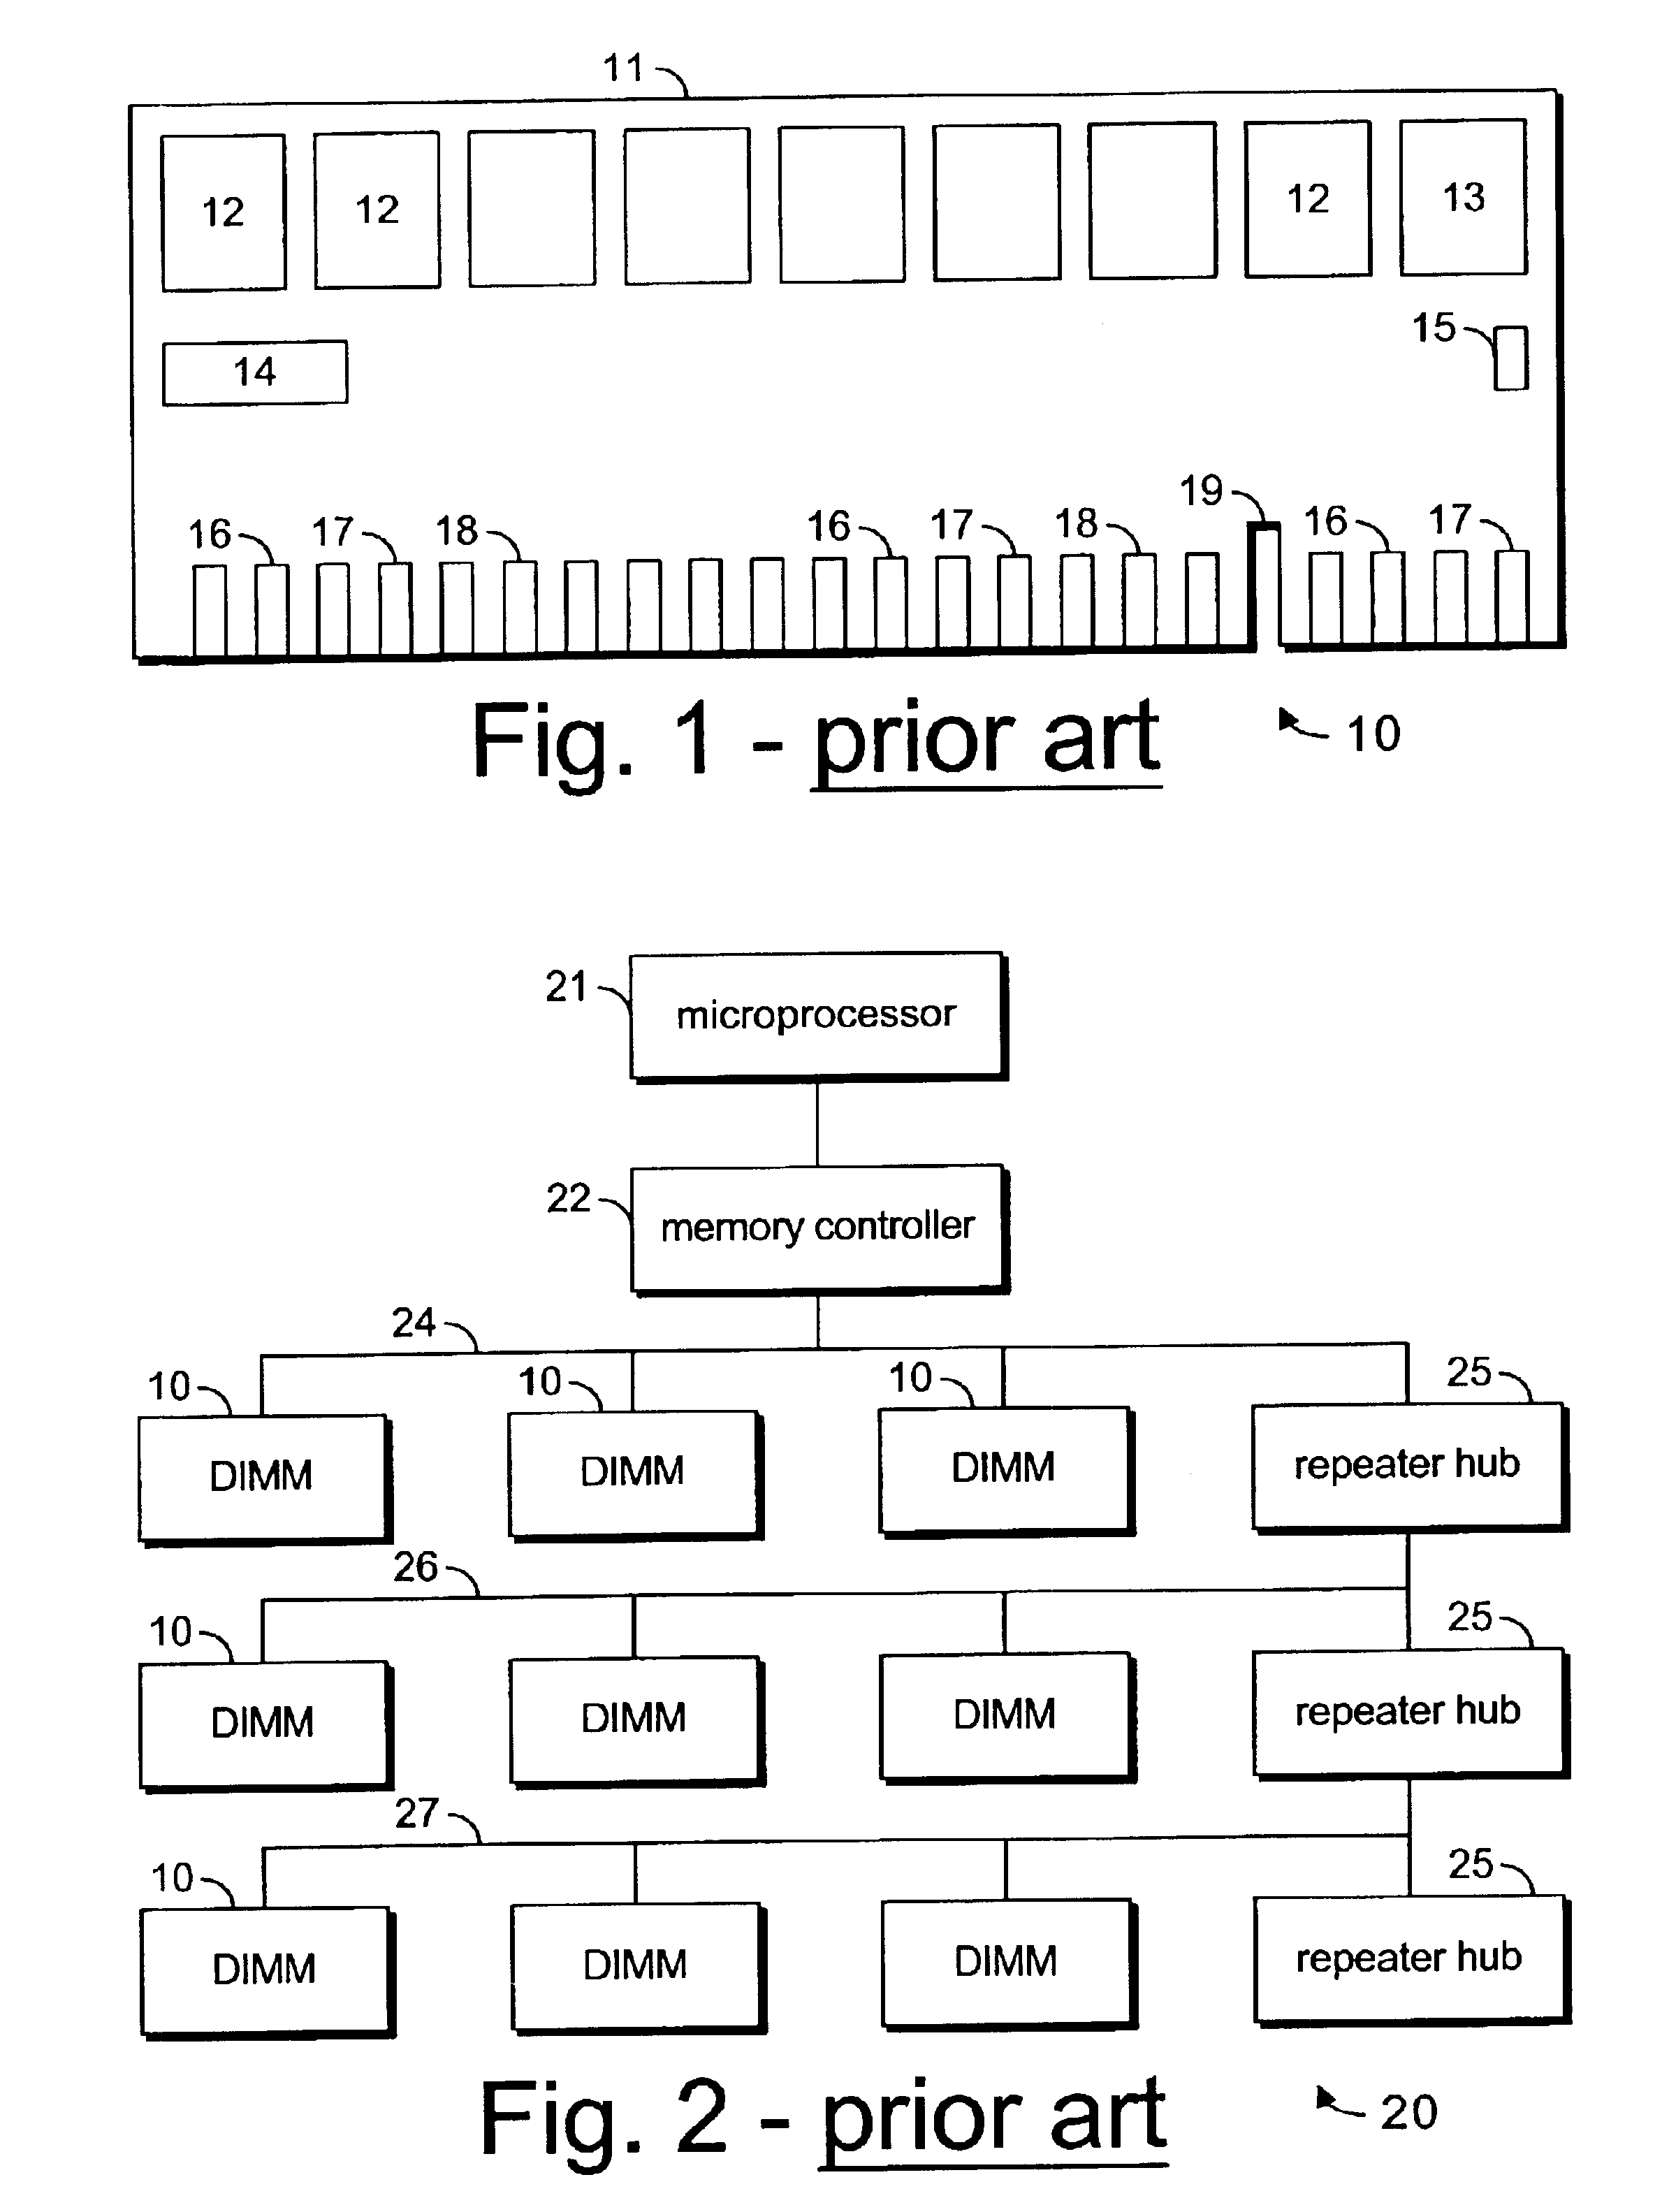 Module interface with optical and electrical interconnects